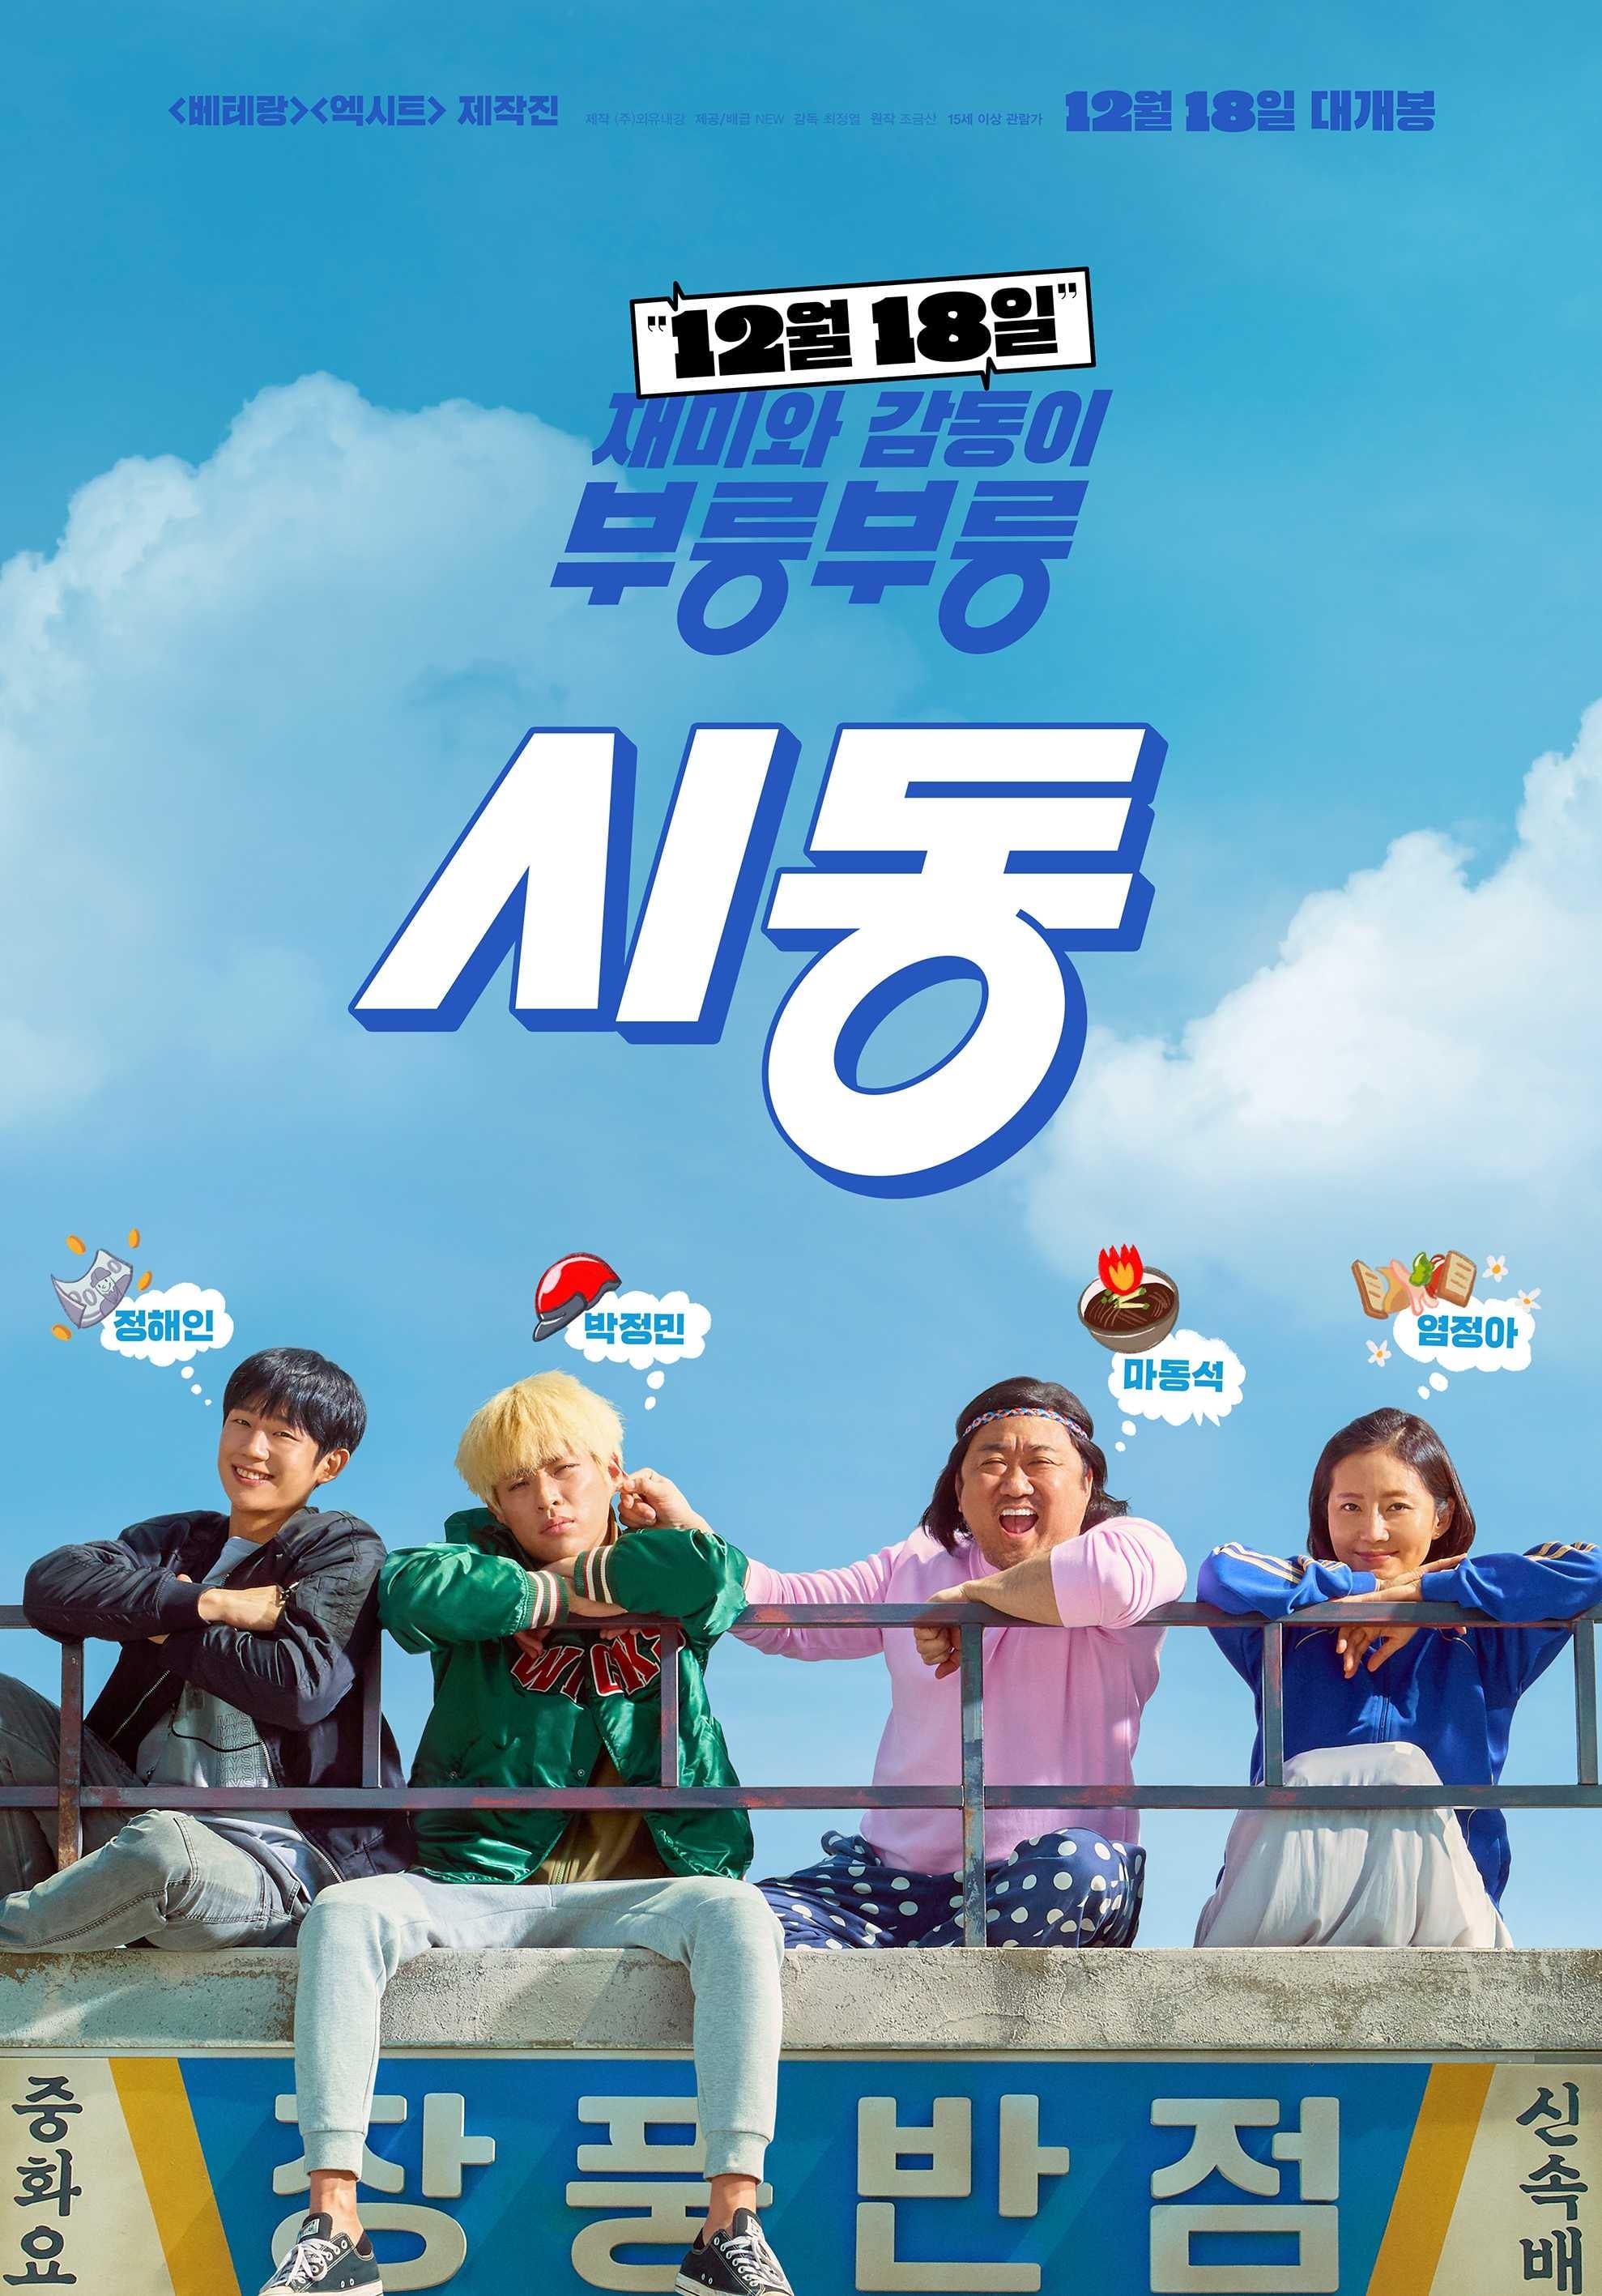 Poster for the movie "시동"